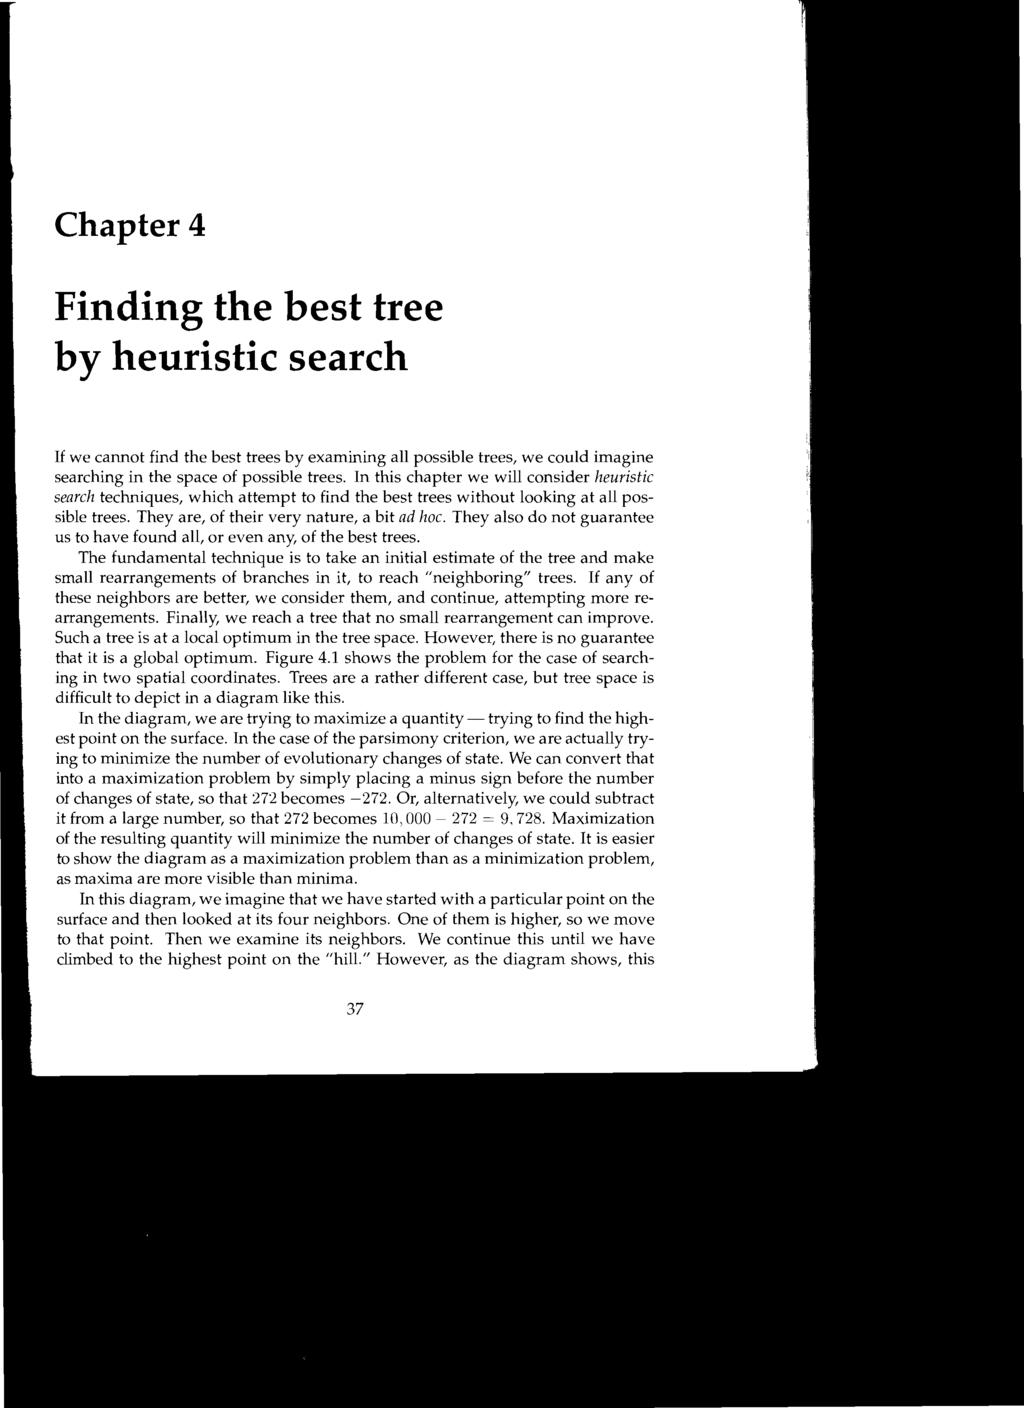 Chapter 4 Finding the best tree by heuristic search If we cannot find the best trees by examining all possible trees, we could imagine searching in the space of possible trees.